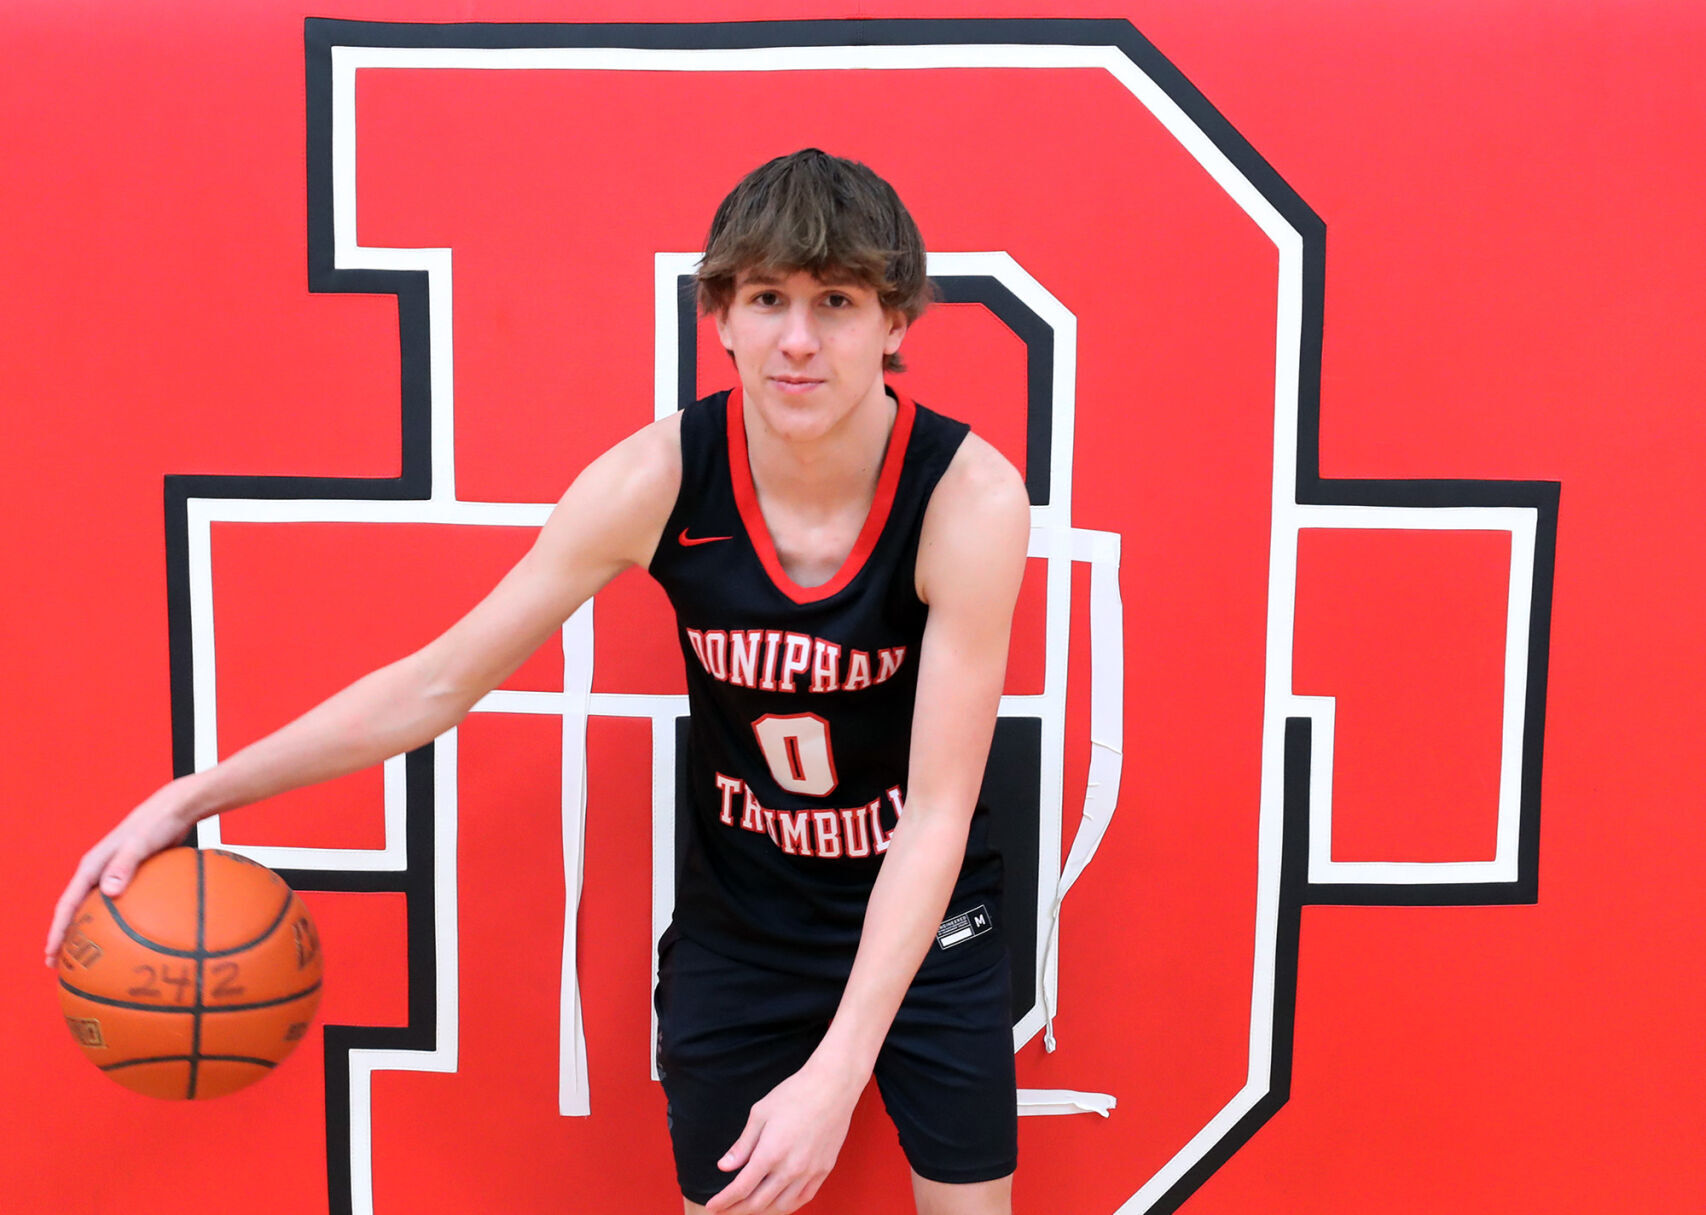 Jack Poppe leads Doniphan-Trumbull to success as All-Heartland Super Squad captain